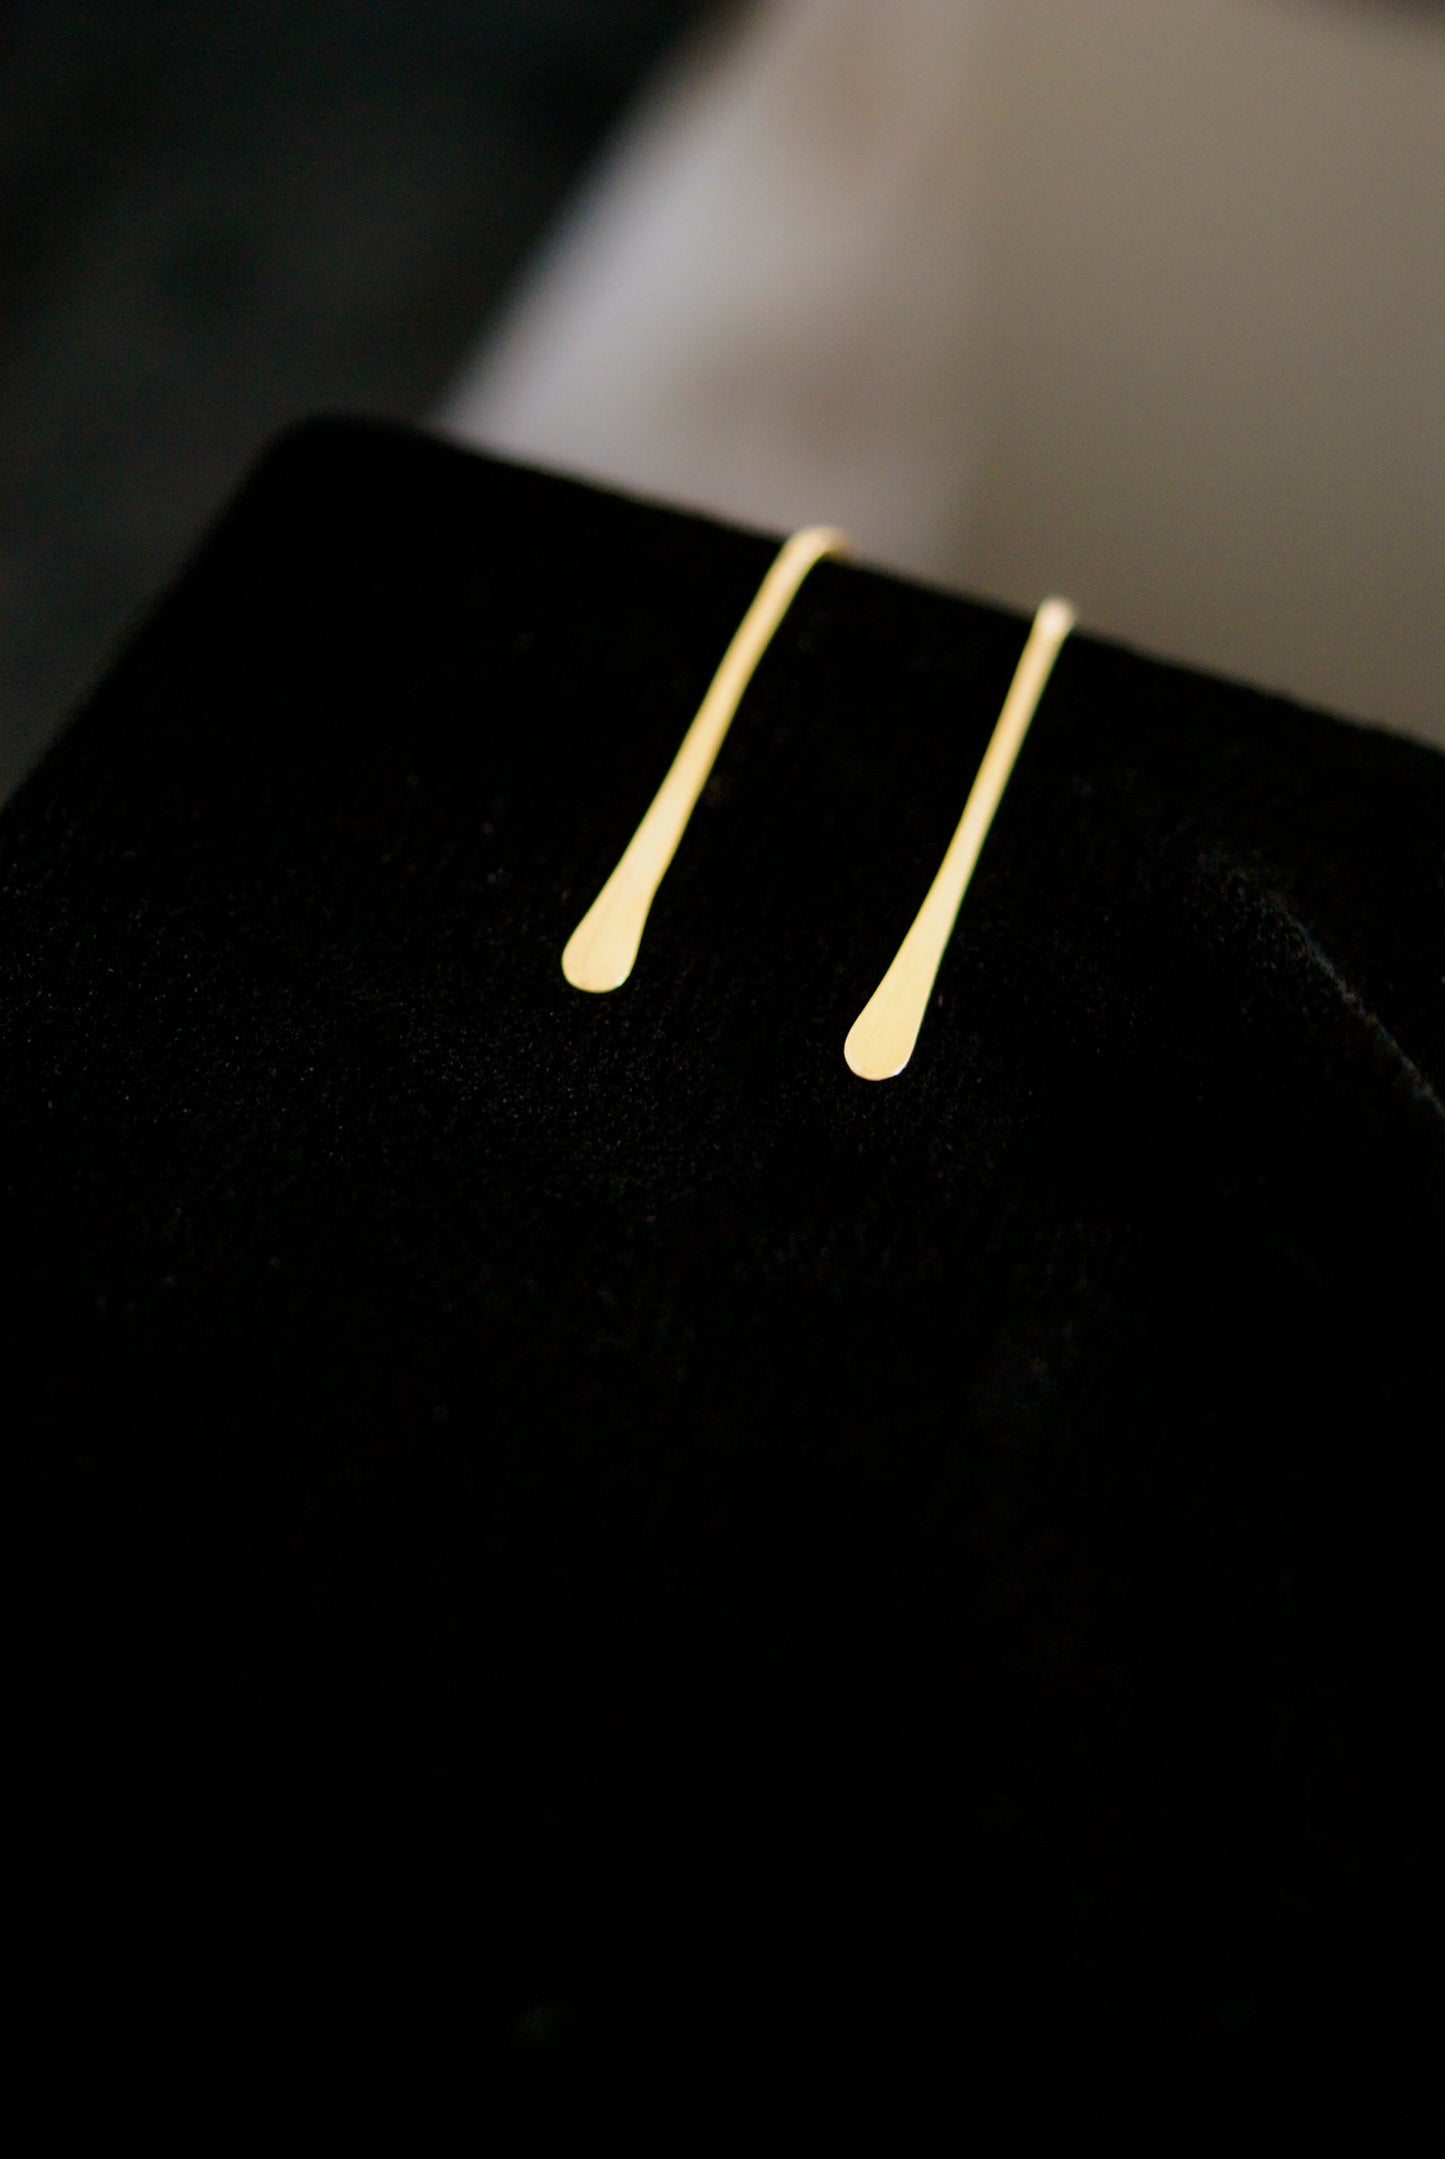 Small Arch Earrings in Solid Gold or Rose Gold